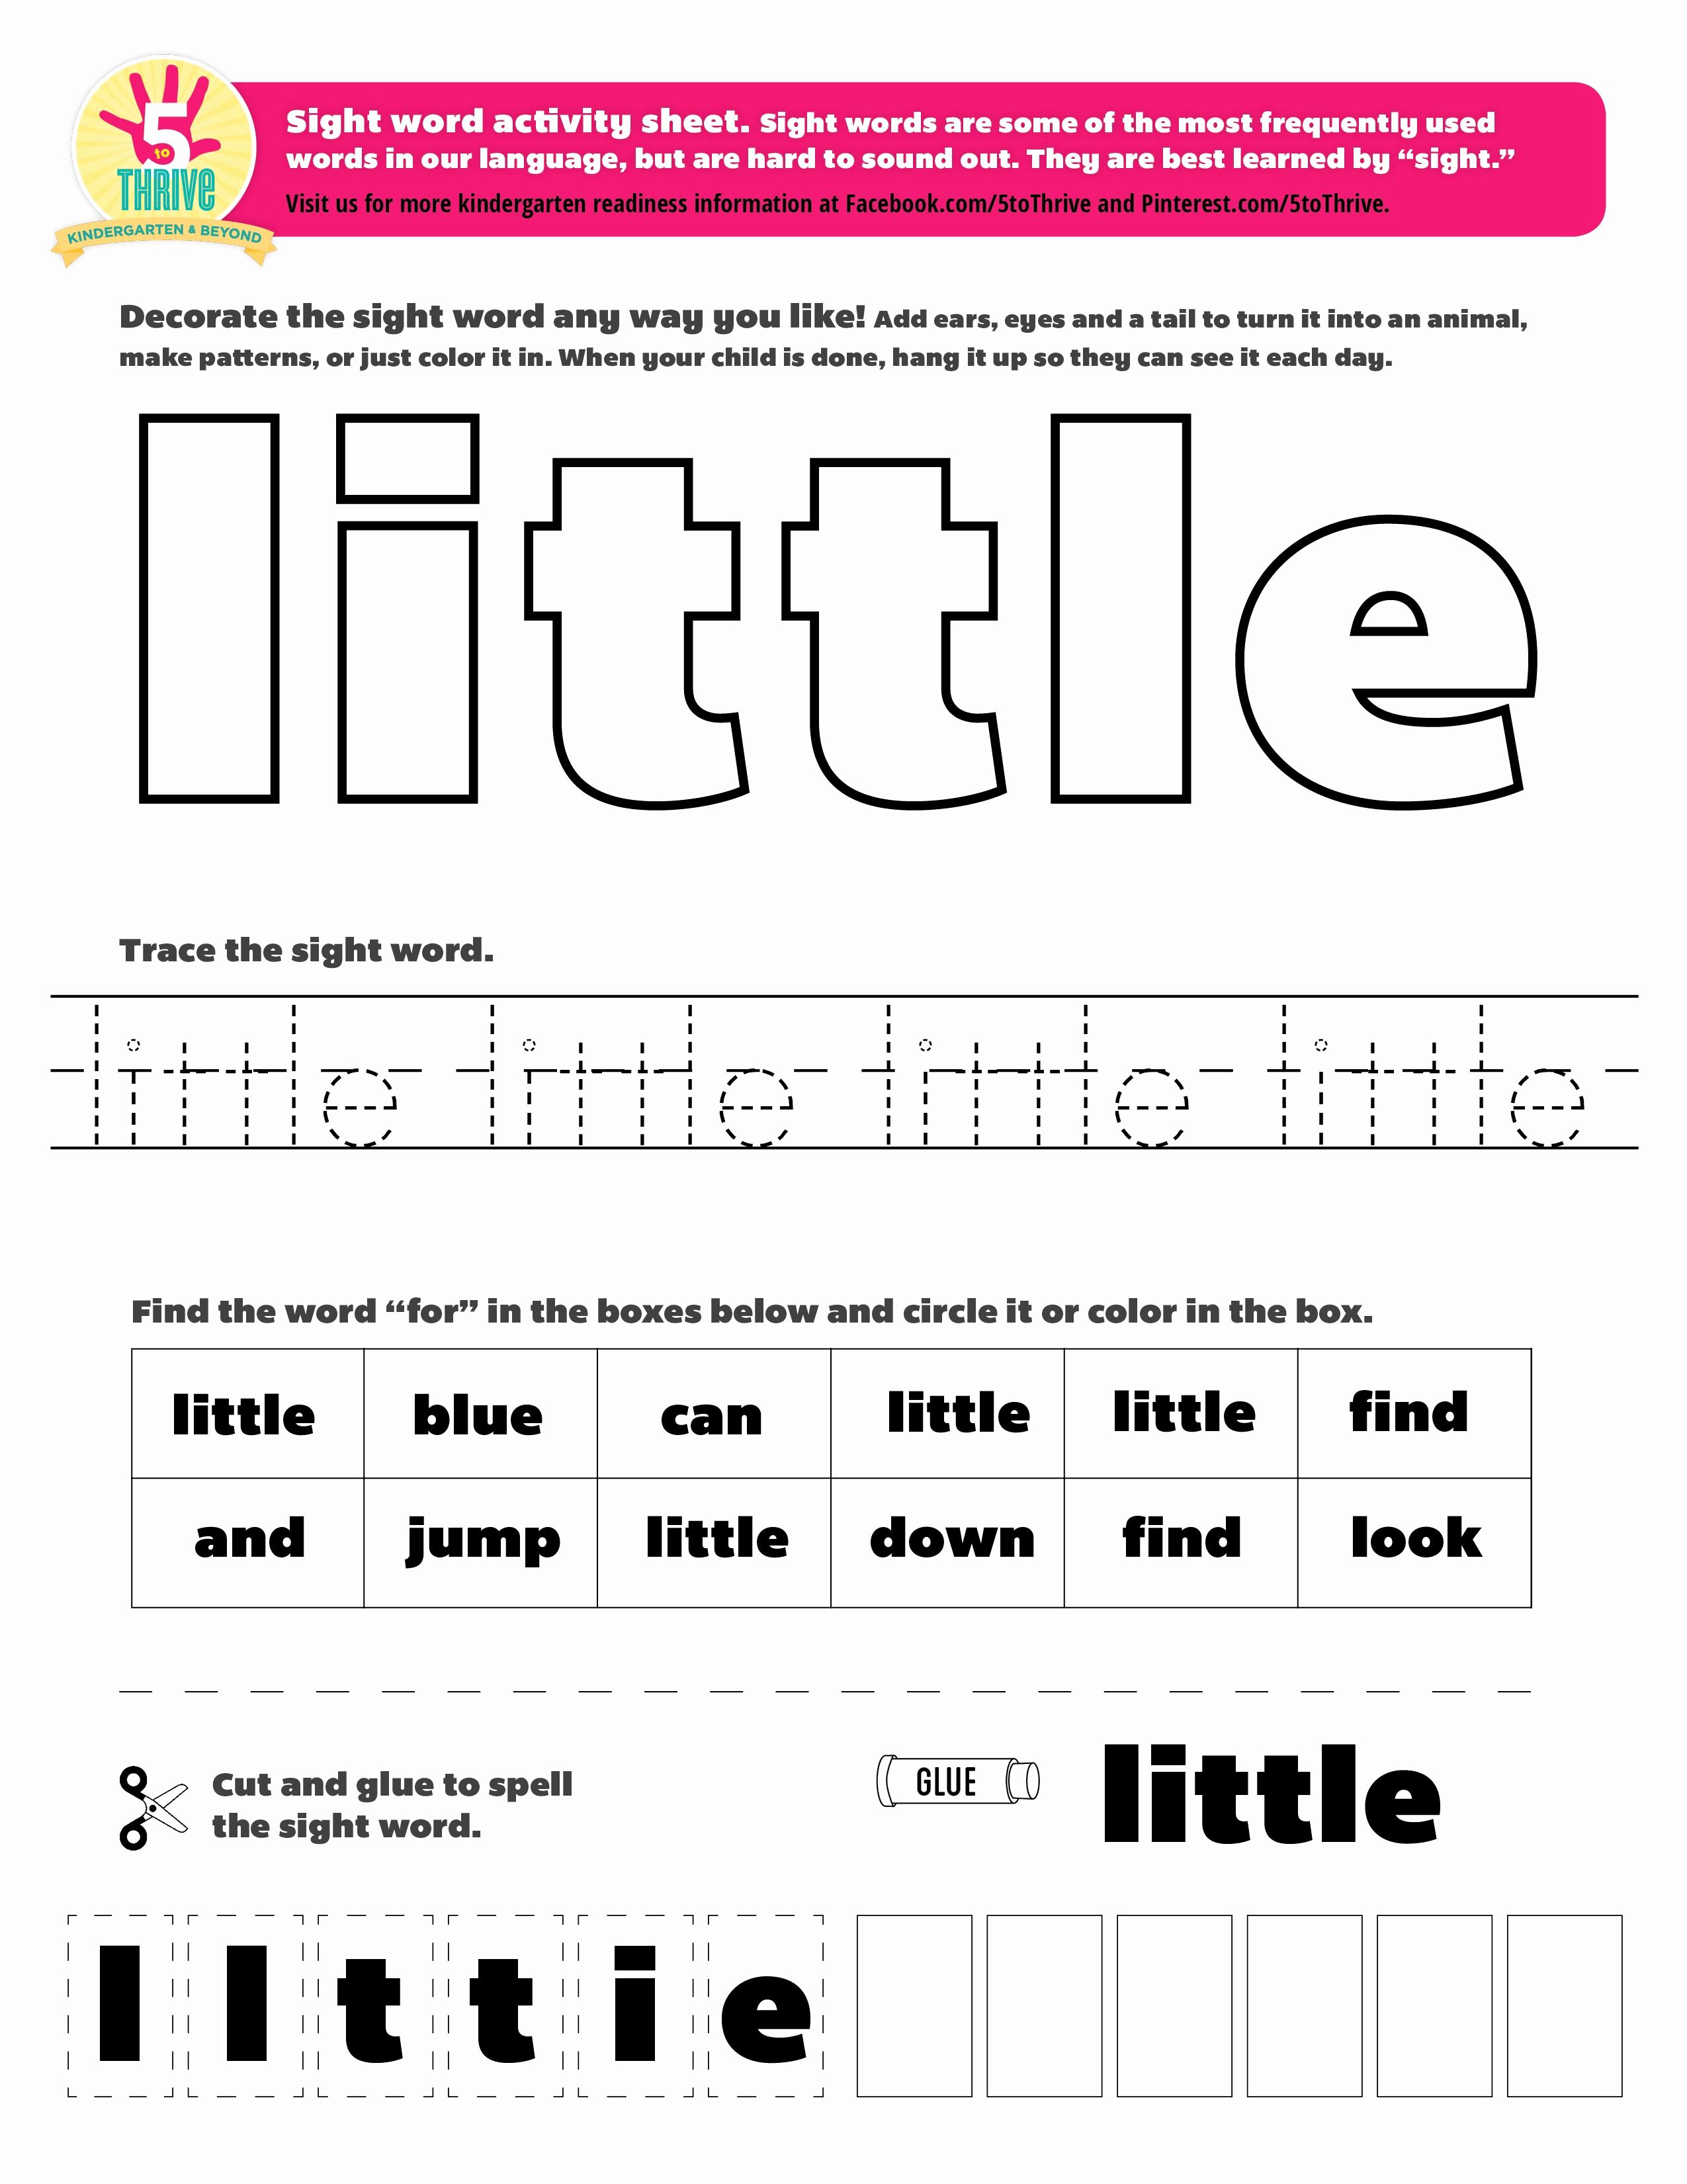 Sight Words Worksheet for Kindergarten Lovely the Sight Word This Week is &quot;little&quot; Sight Words are some